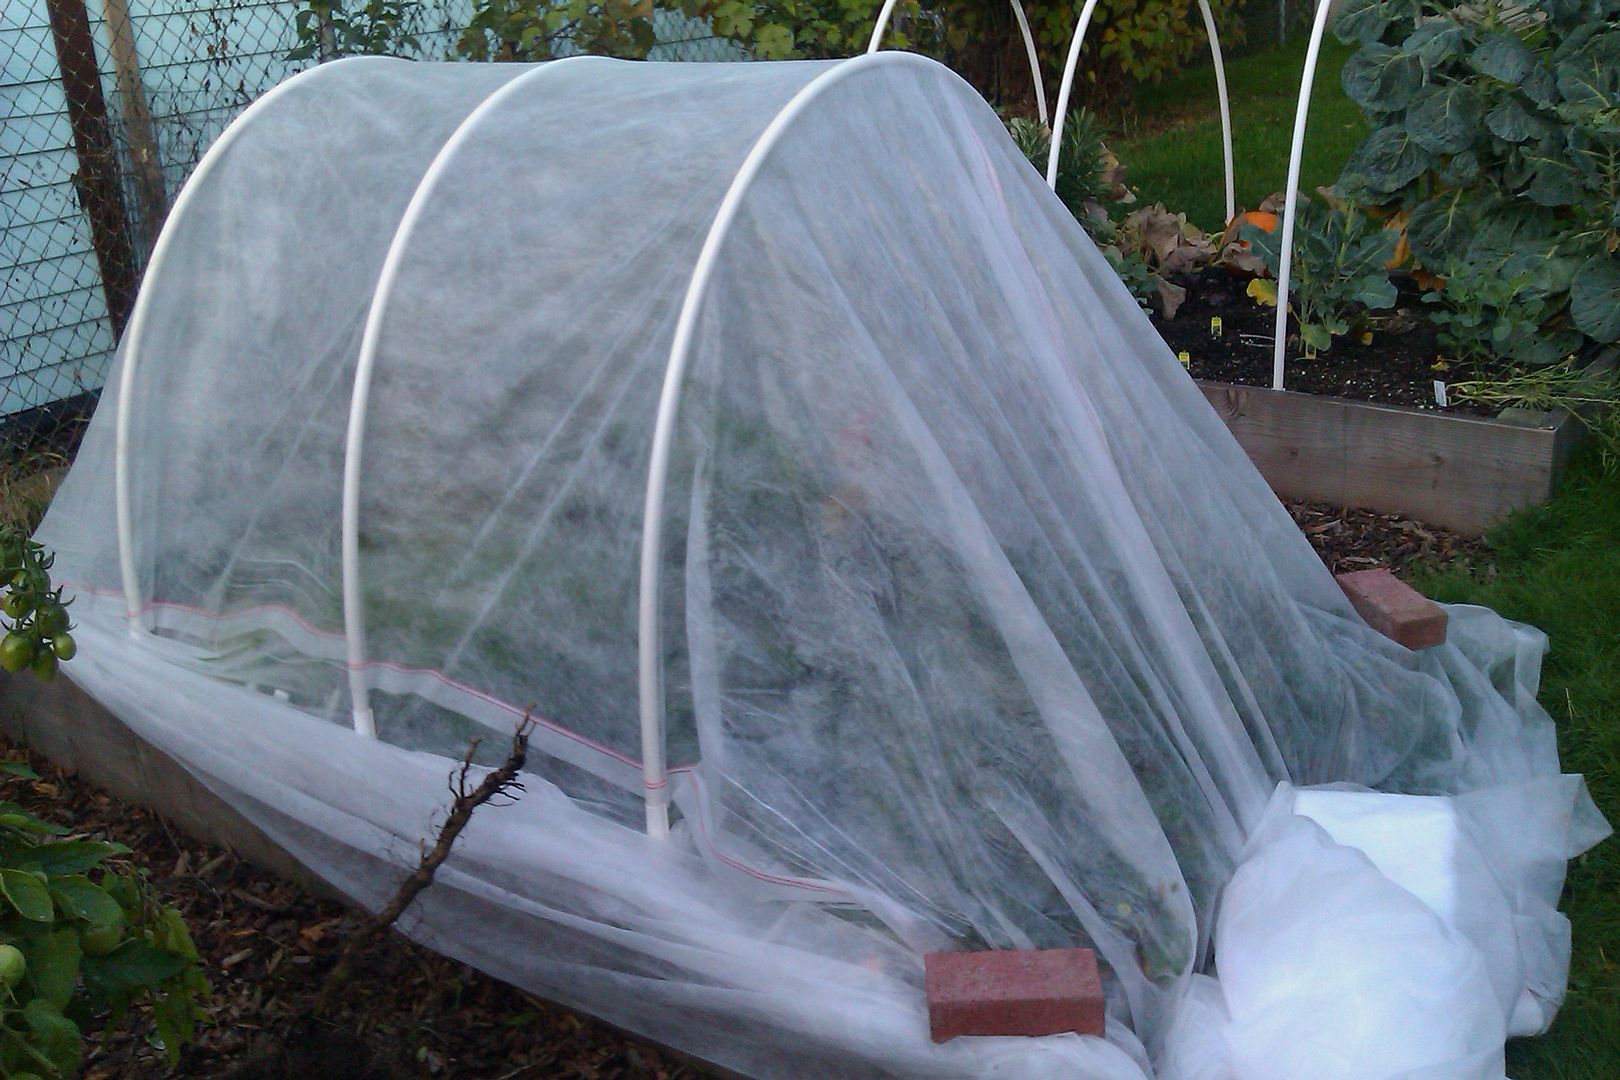 row covers in Fall garden — October 2011